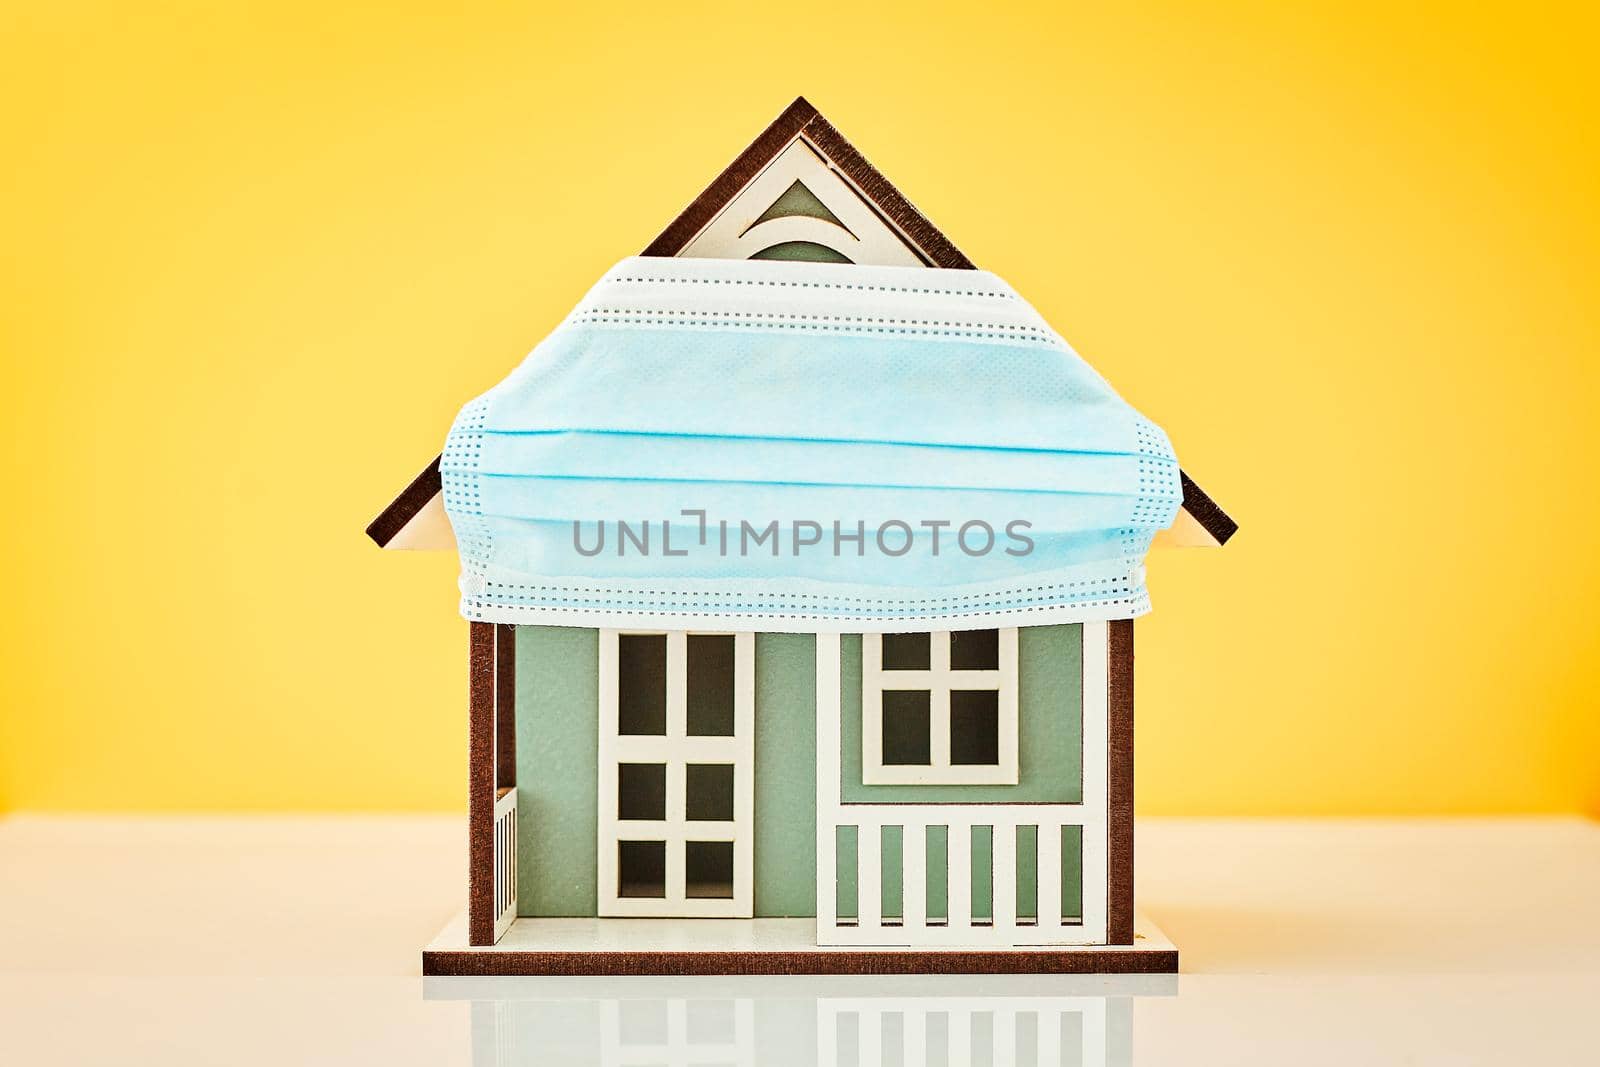 Model house wearing protective medical mask in yellow background by Maximusnd